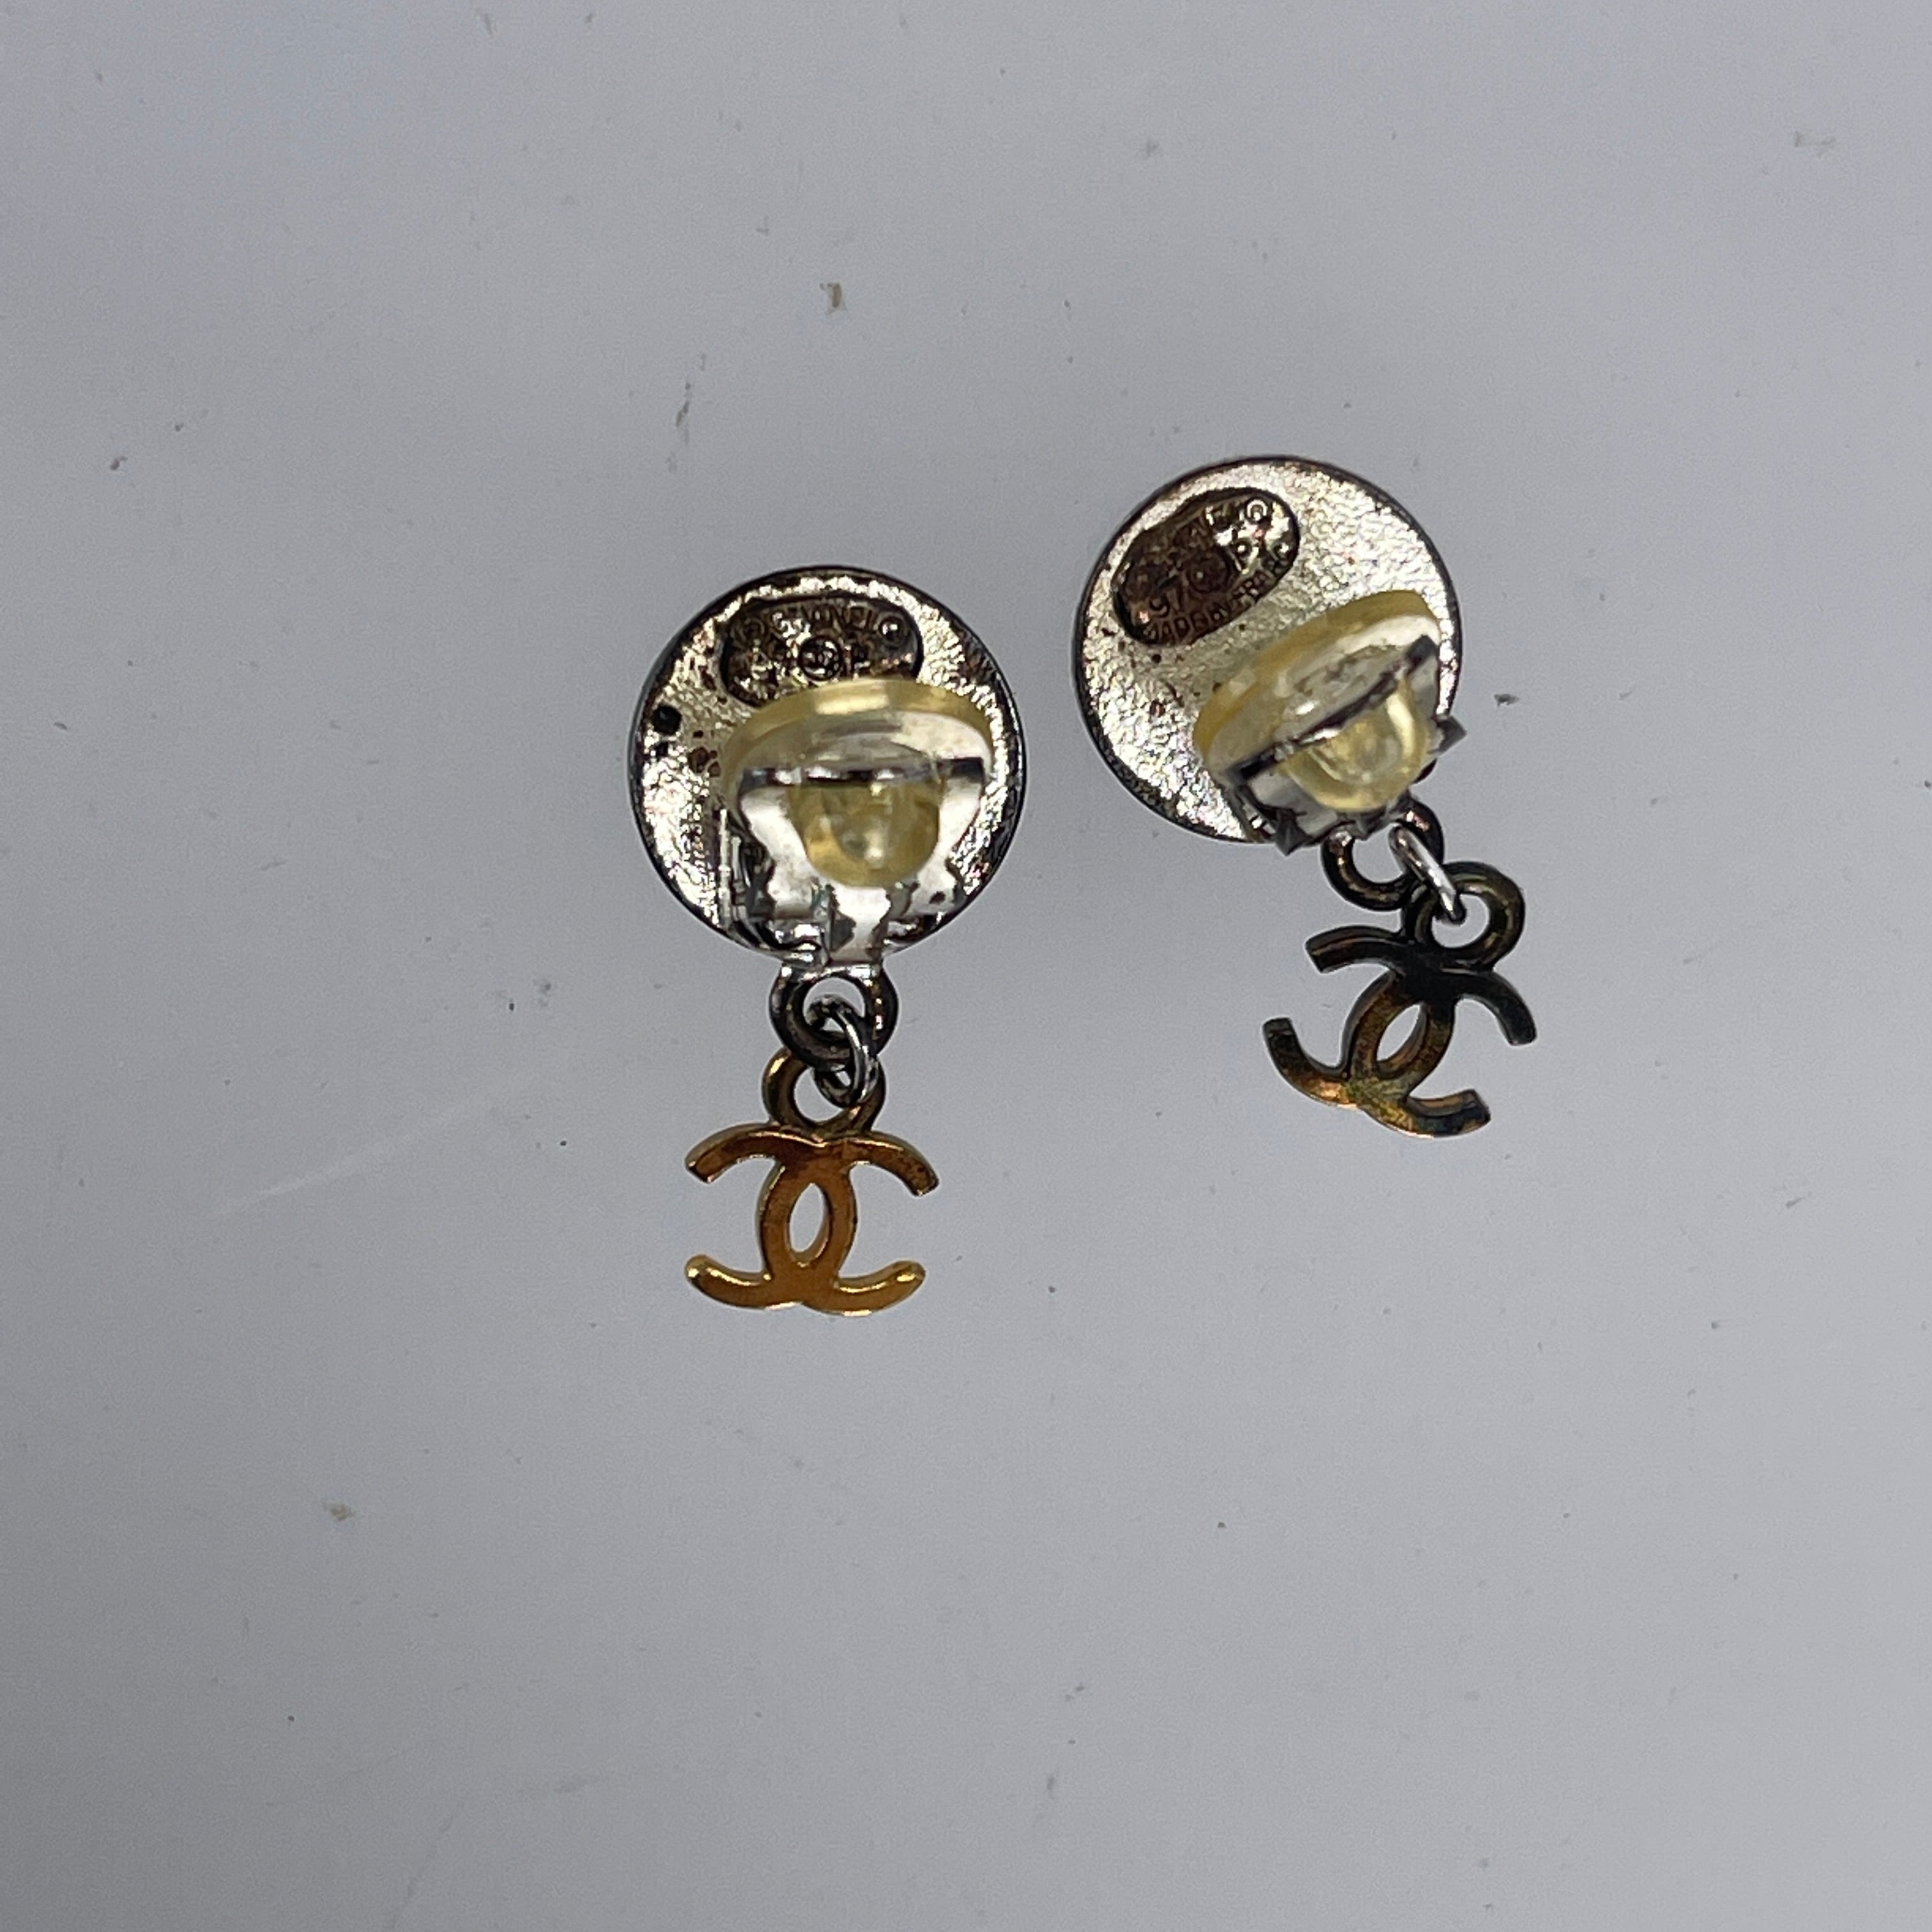 VINTAGE STYLE MAKES A COMEBACK RECOMMENDING CHANELS SIGNATURE  INTERLOCKING CC LOGO EARRINGS AND CLIPON EARRINGS